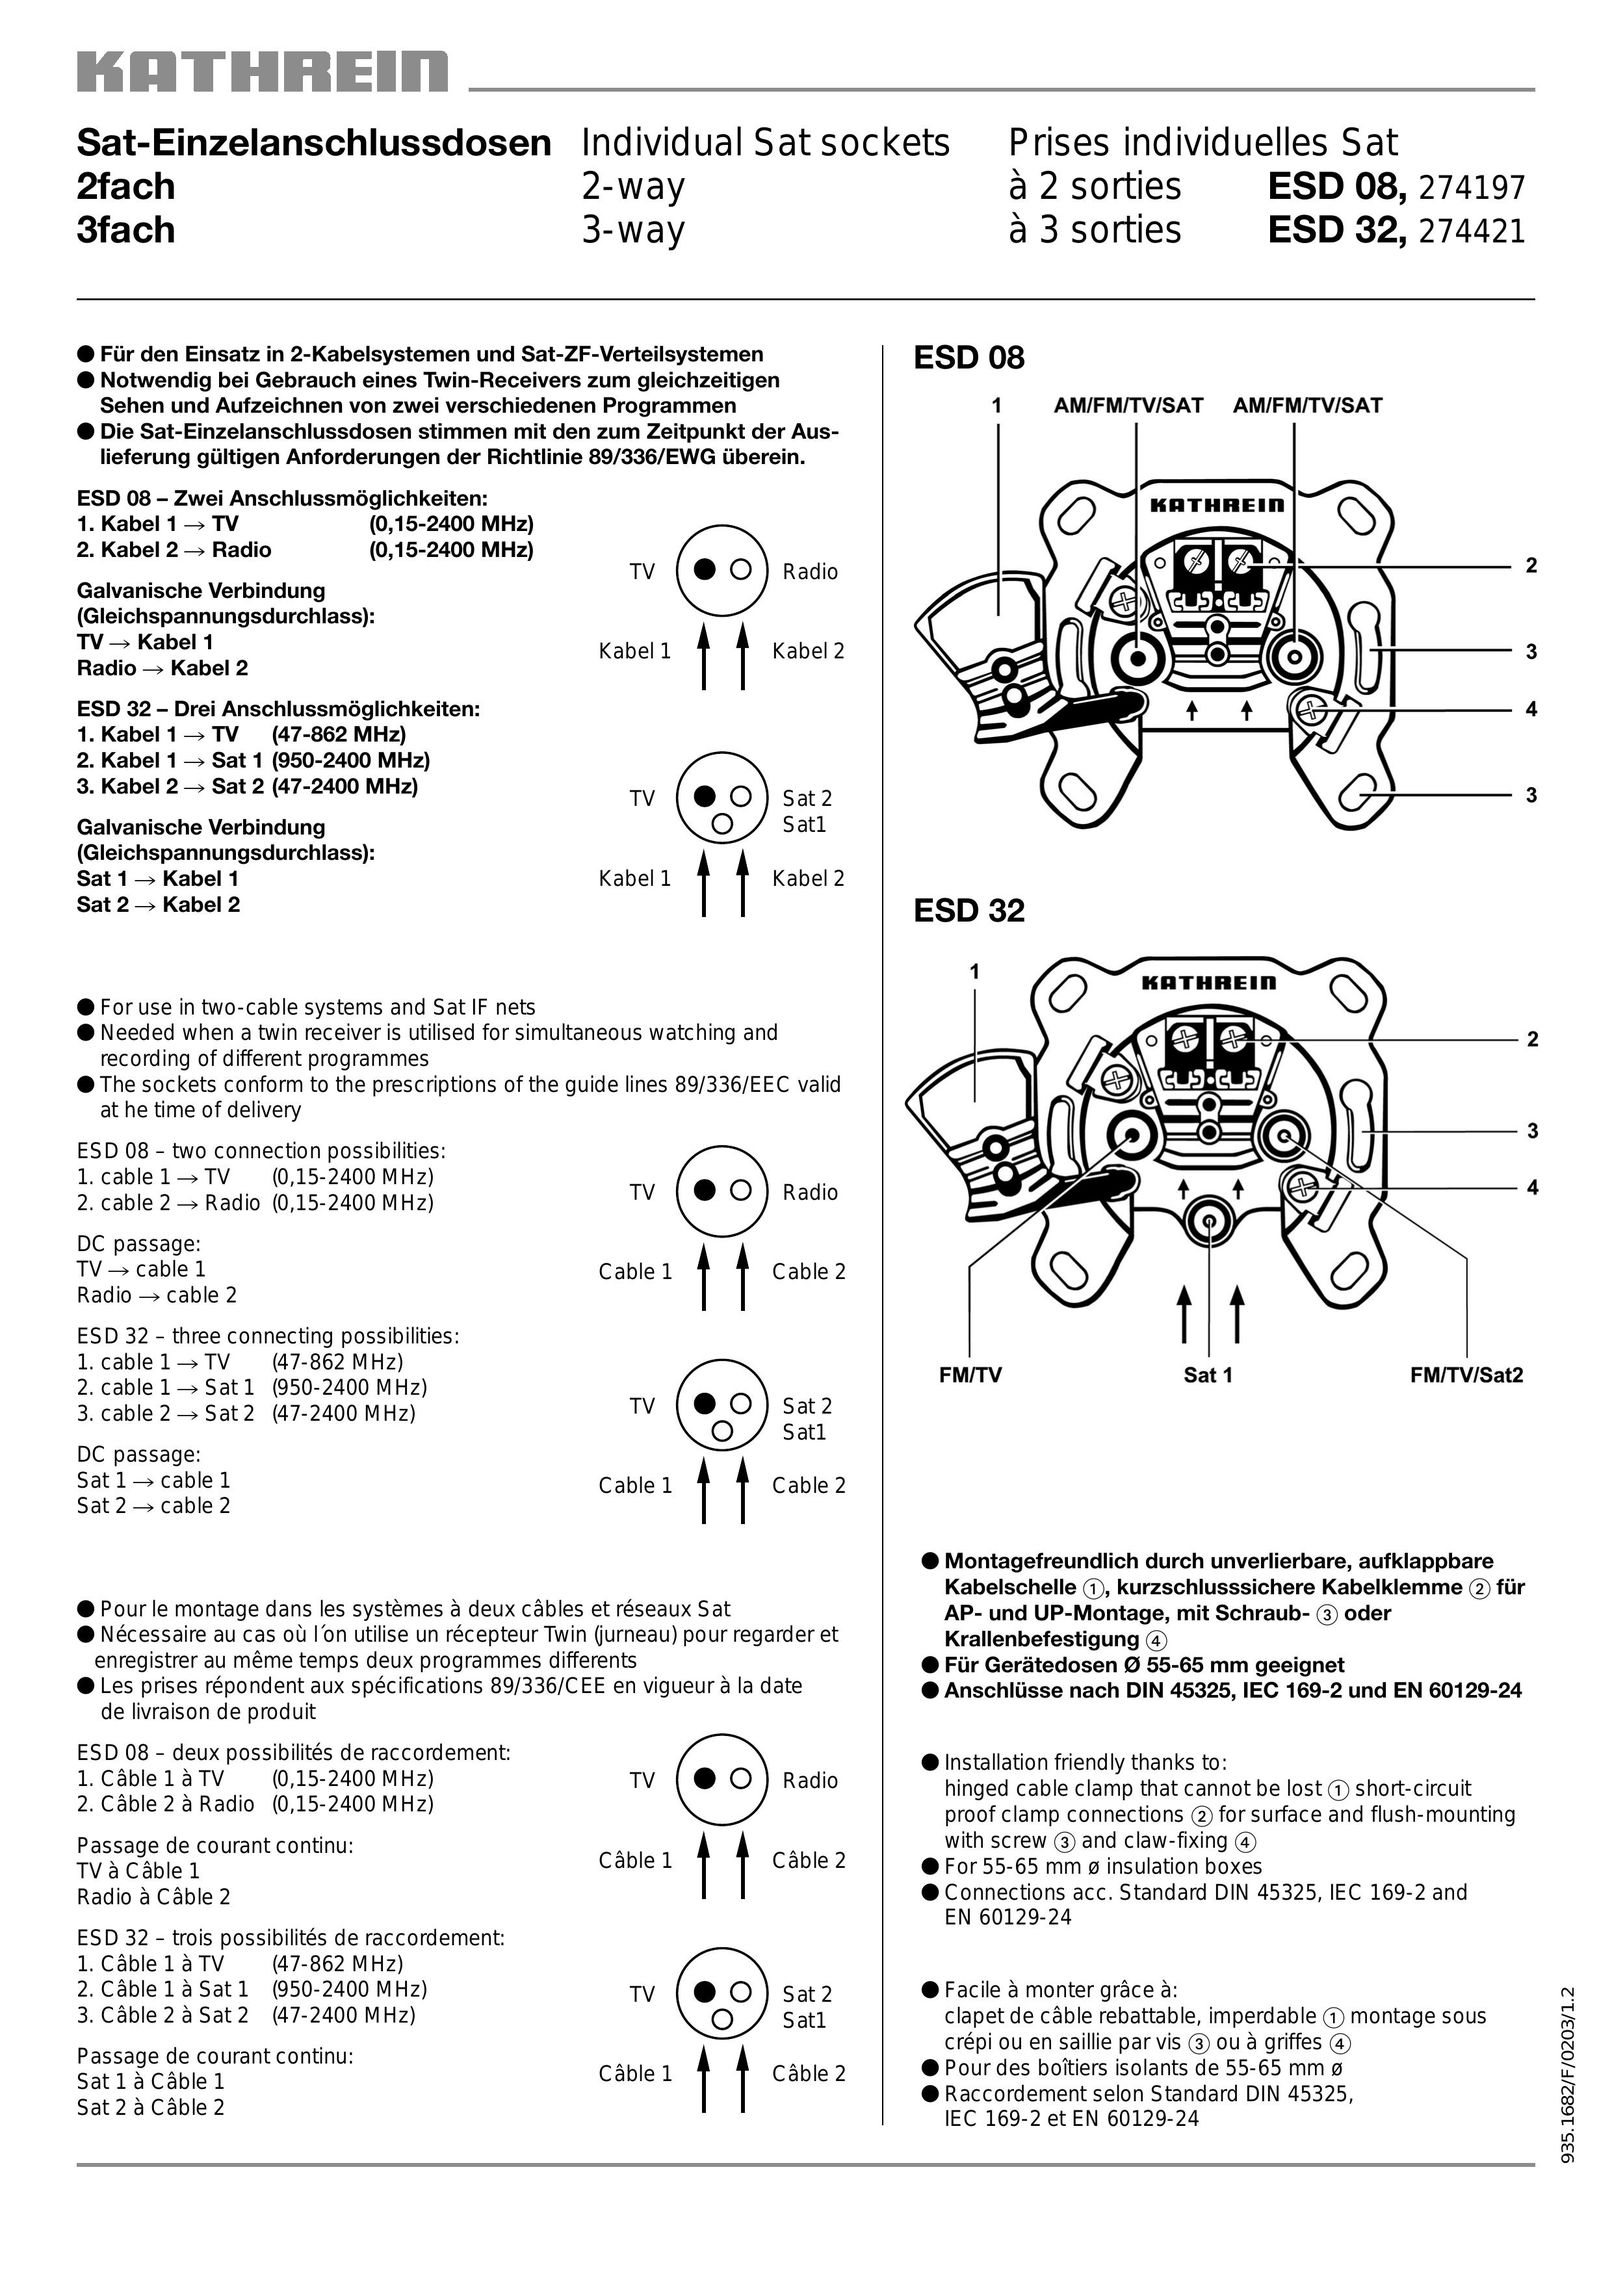 Kathrein ESD 08 TV Cables User Manual